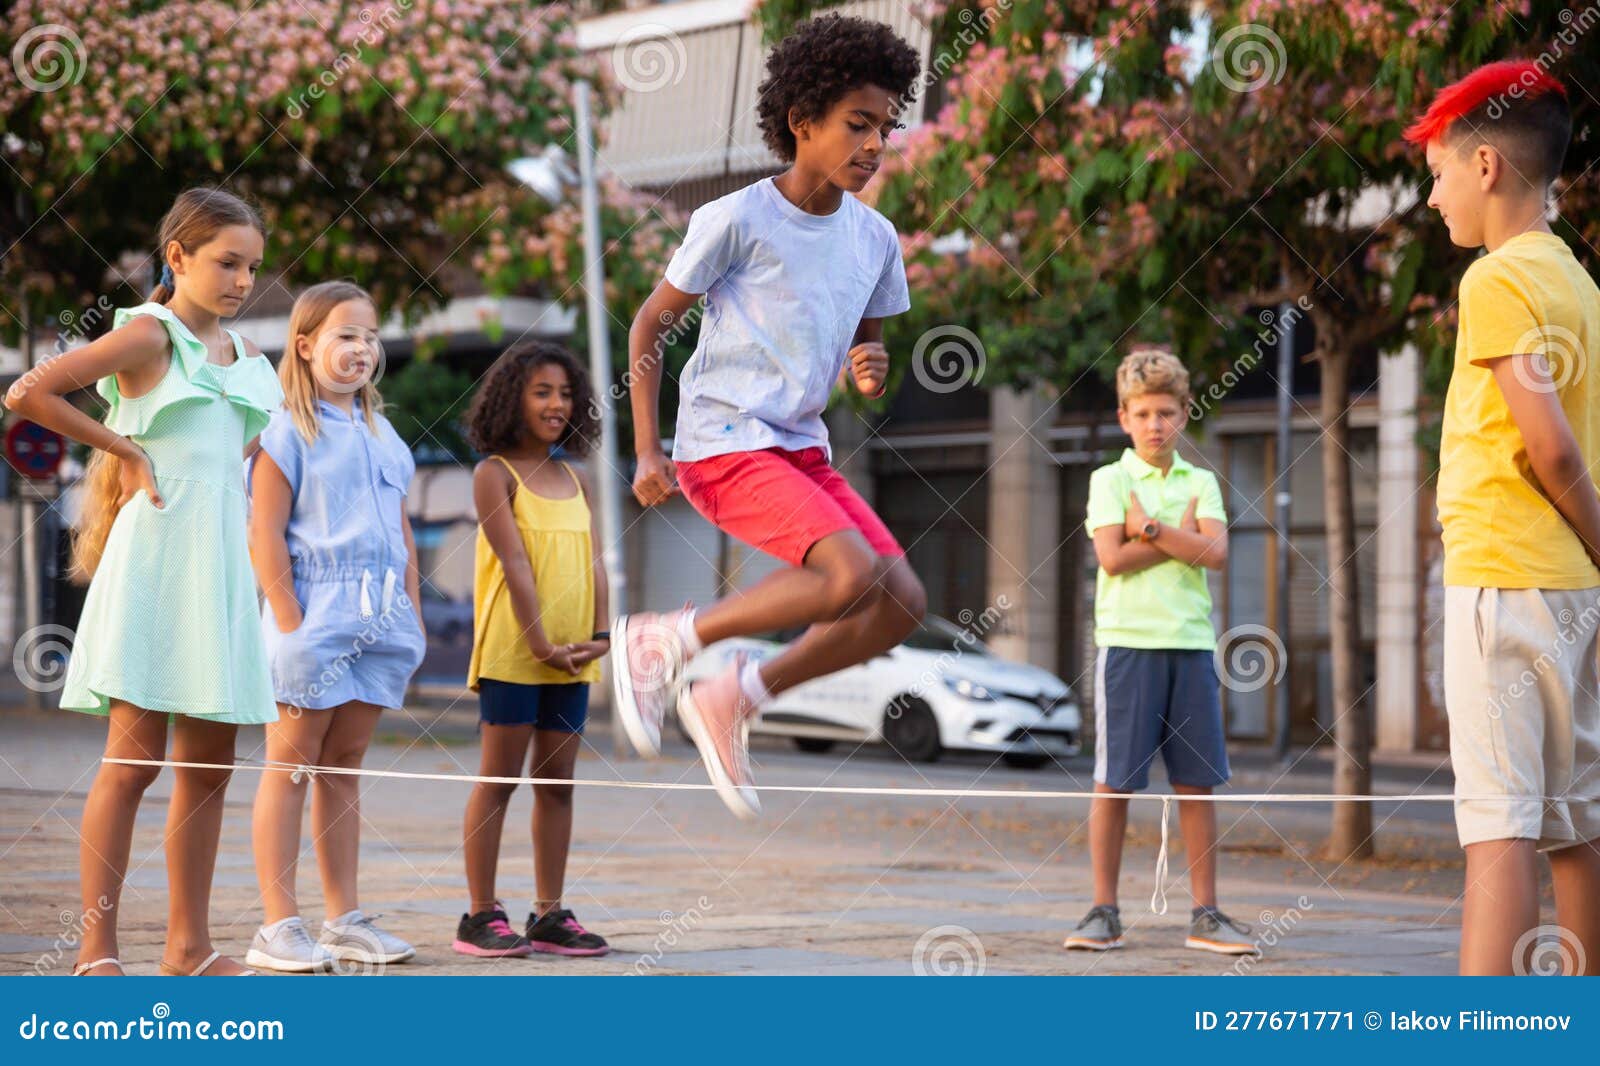 Multiracial children playing together